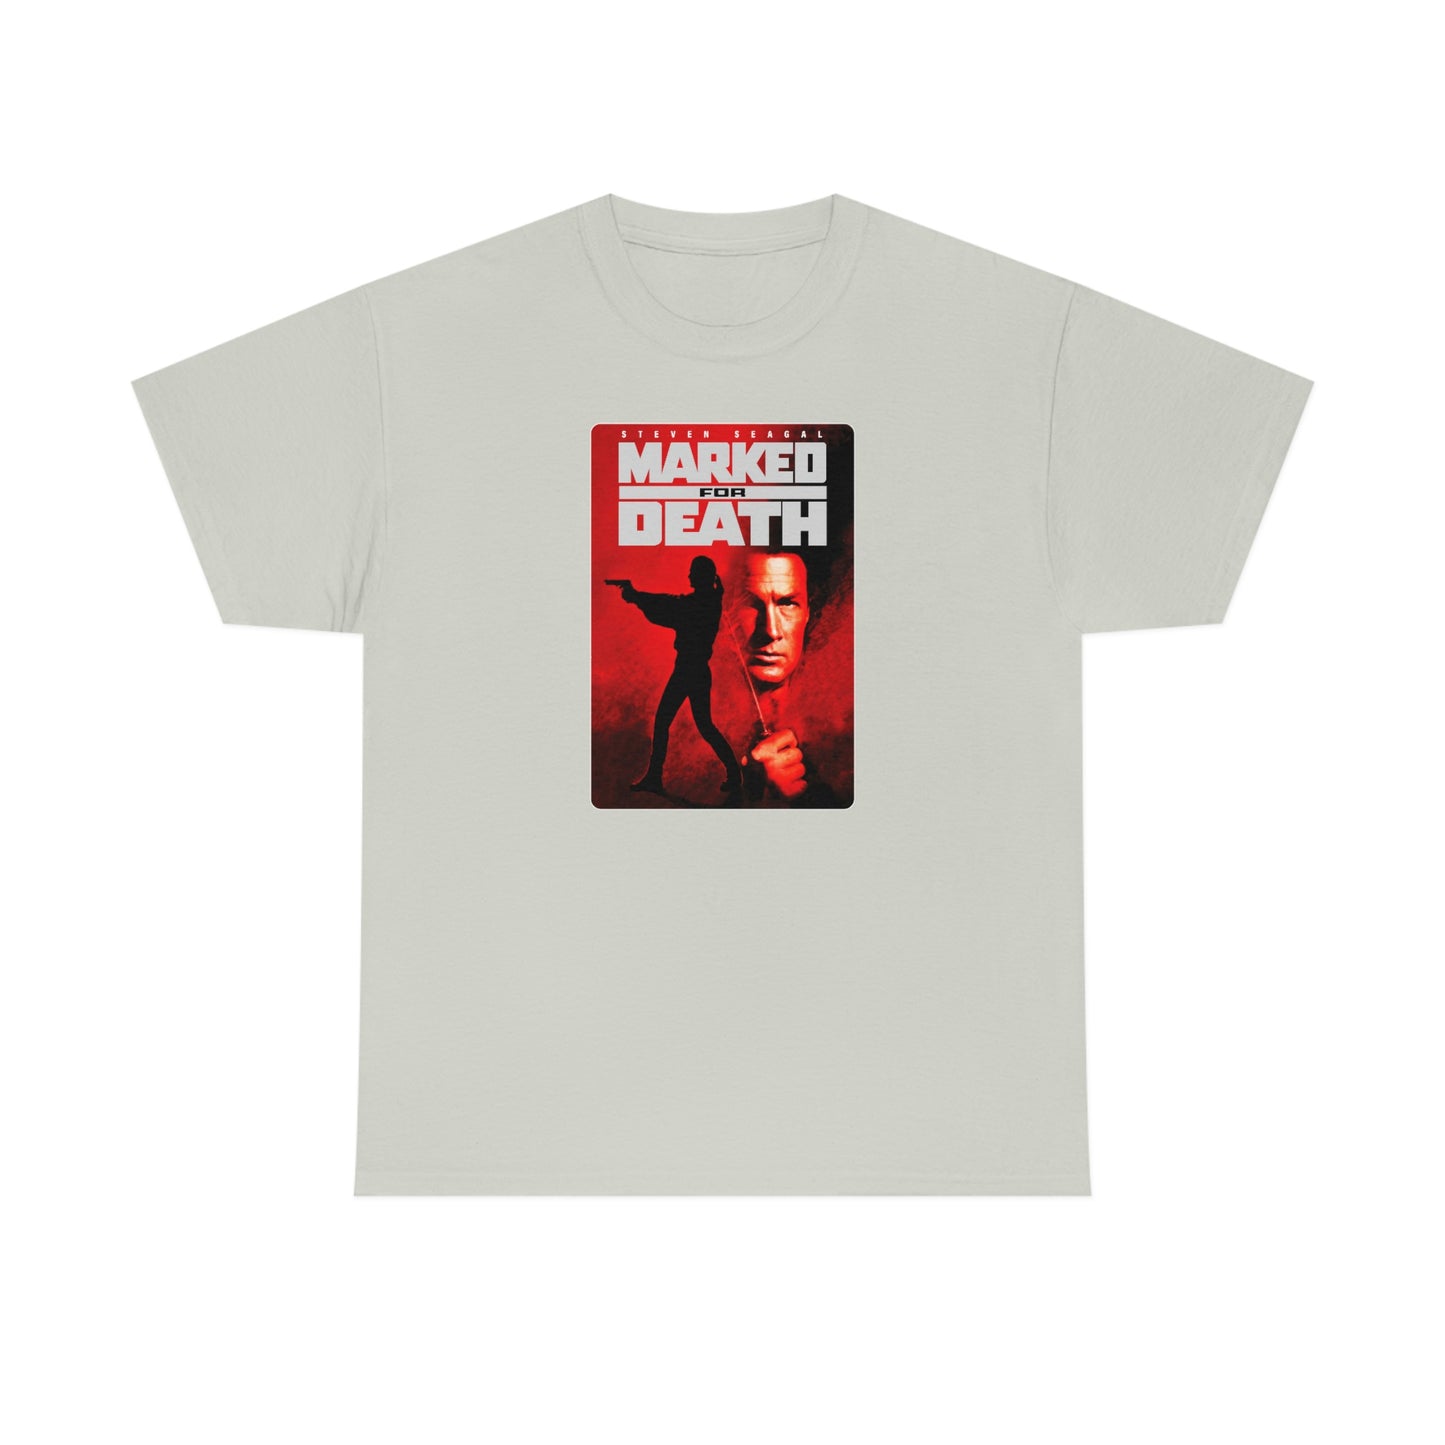 Marked for Death T-Shirt